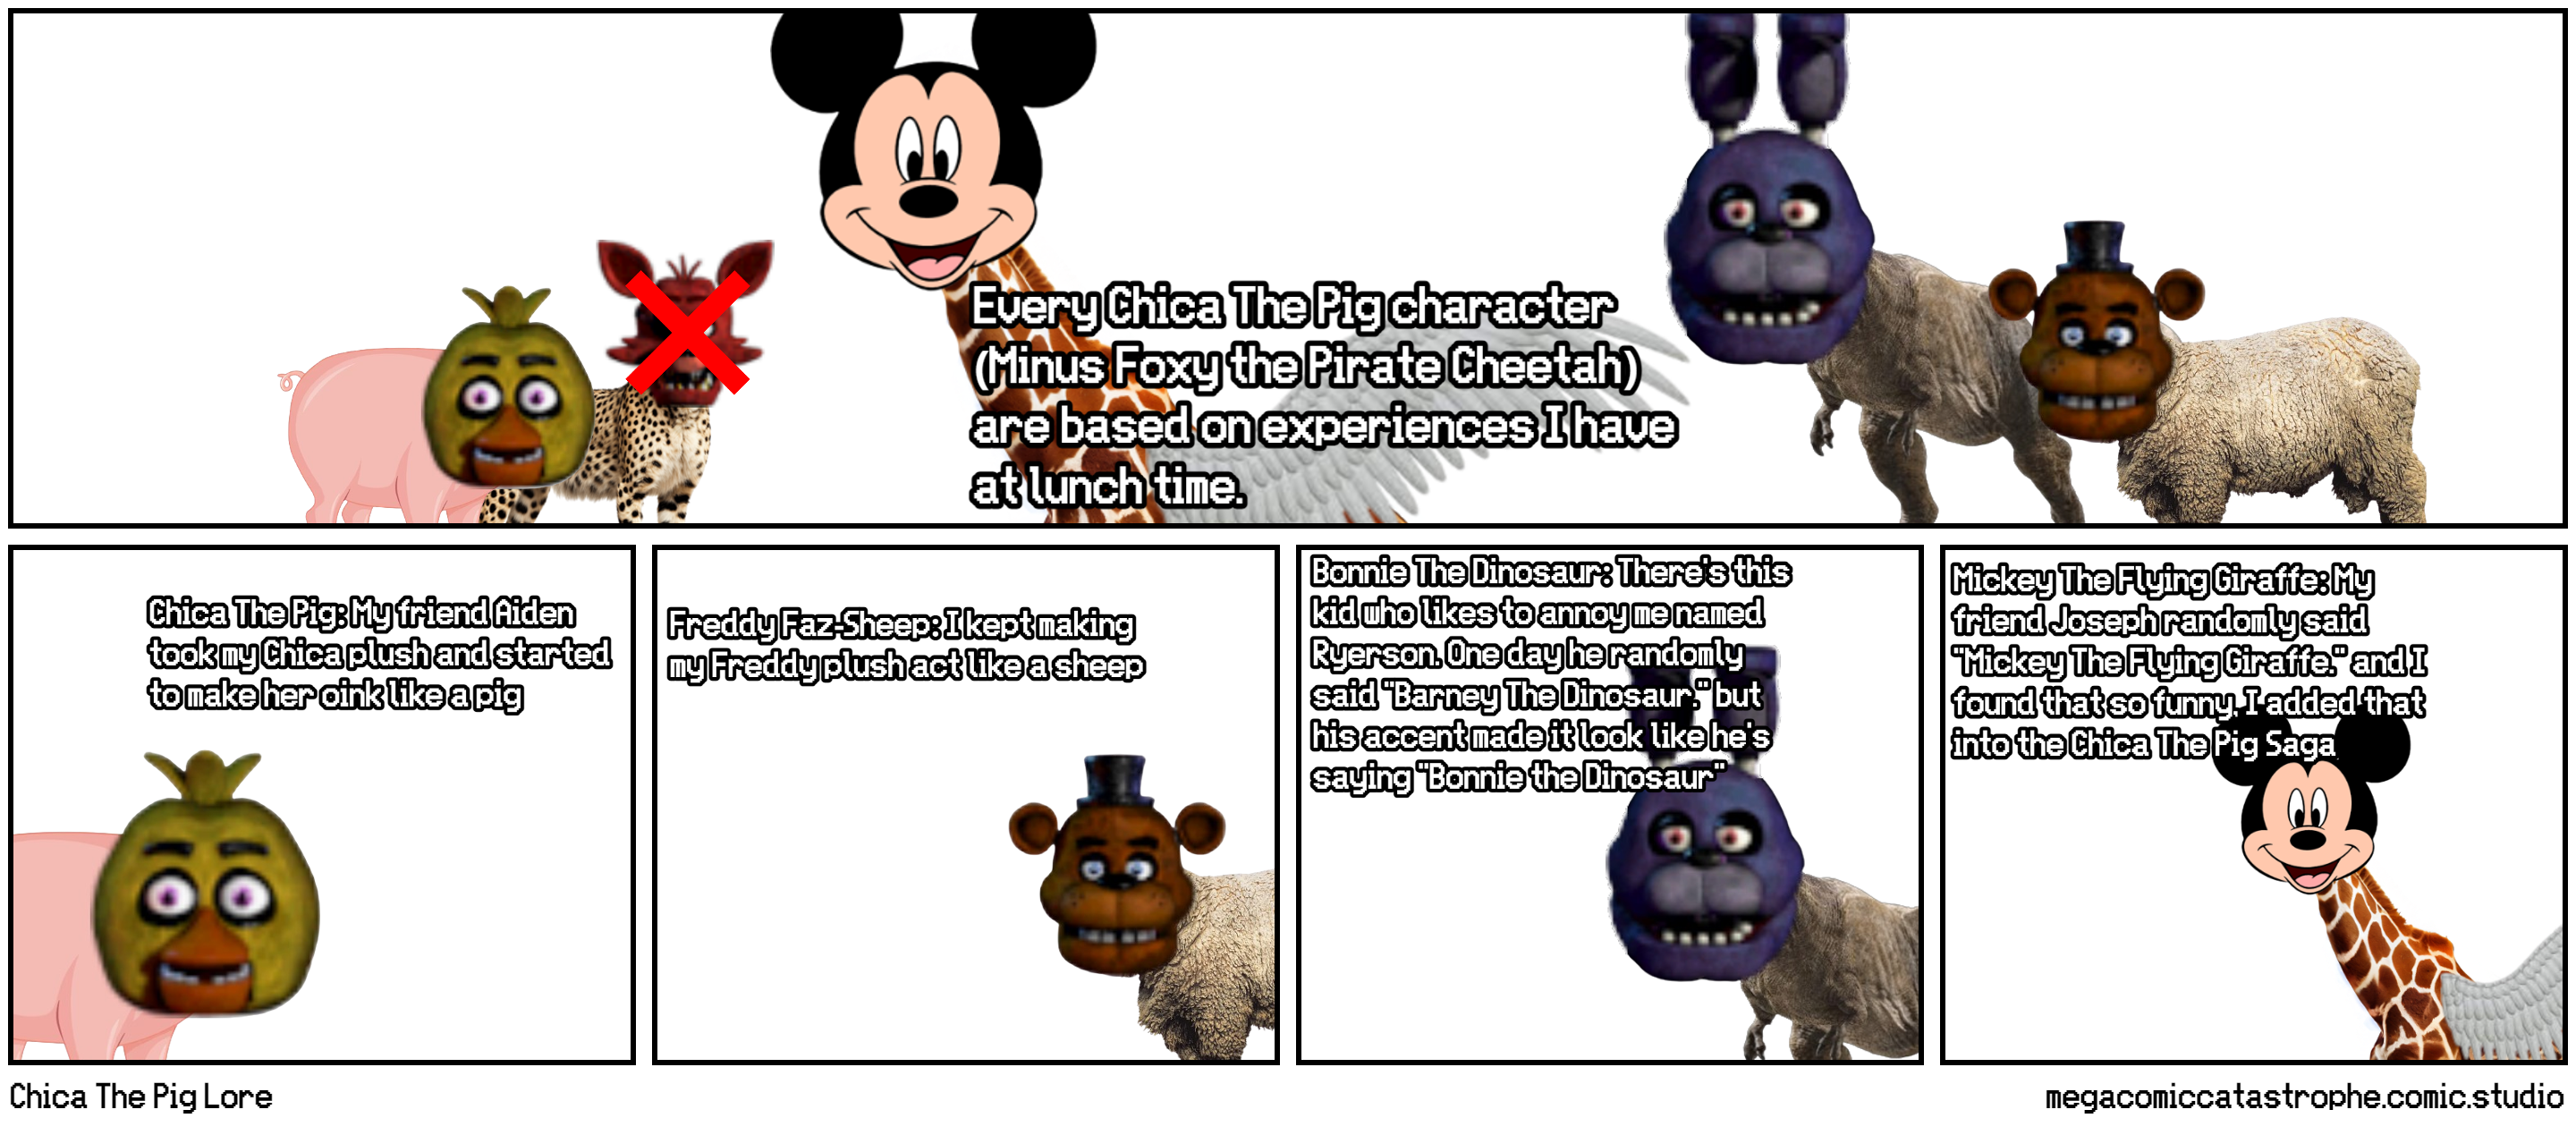 Chica The Pig Lore